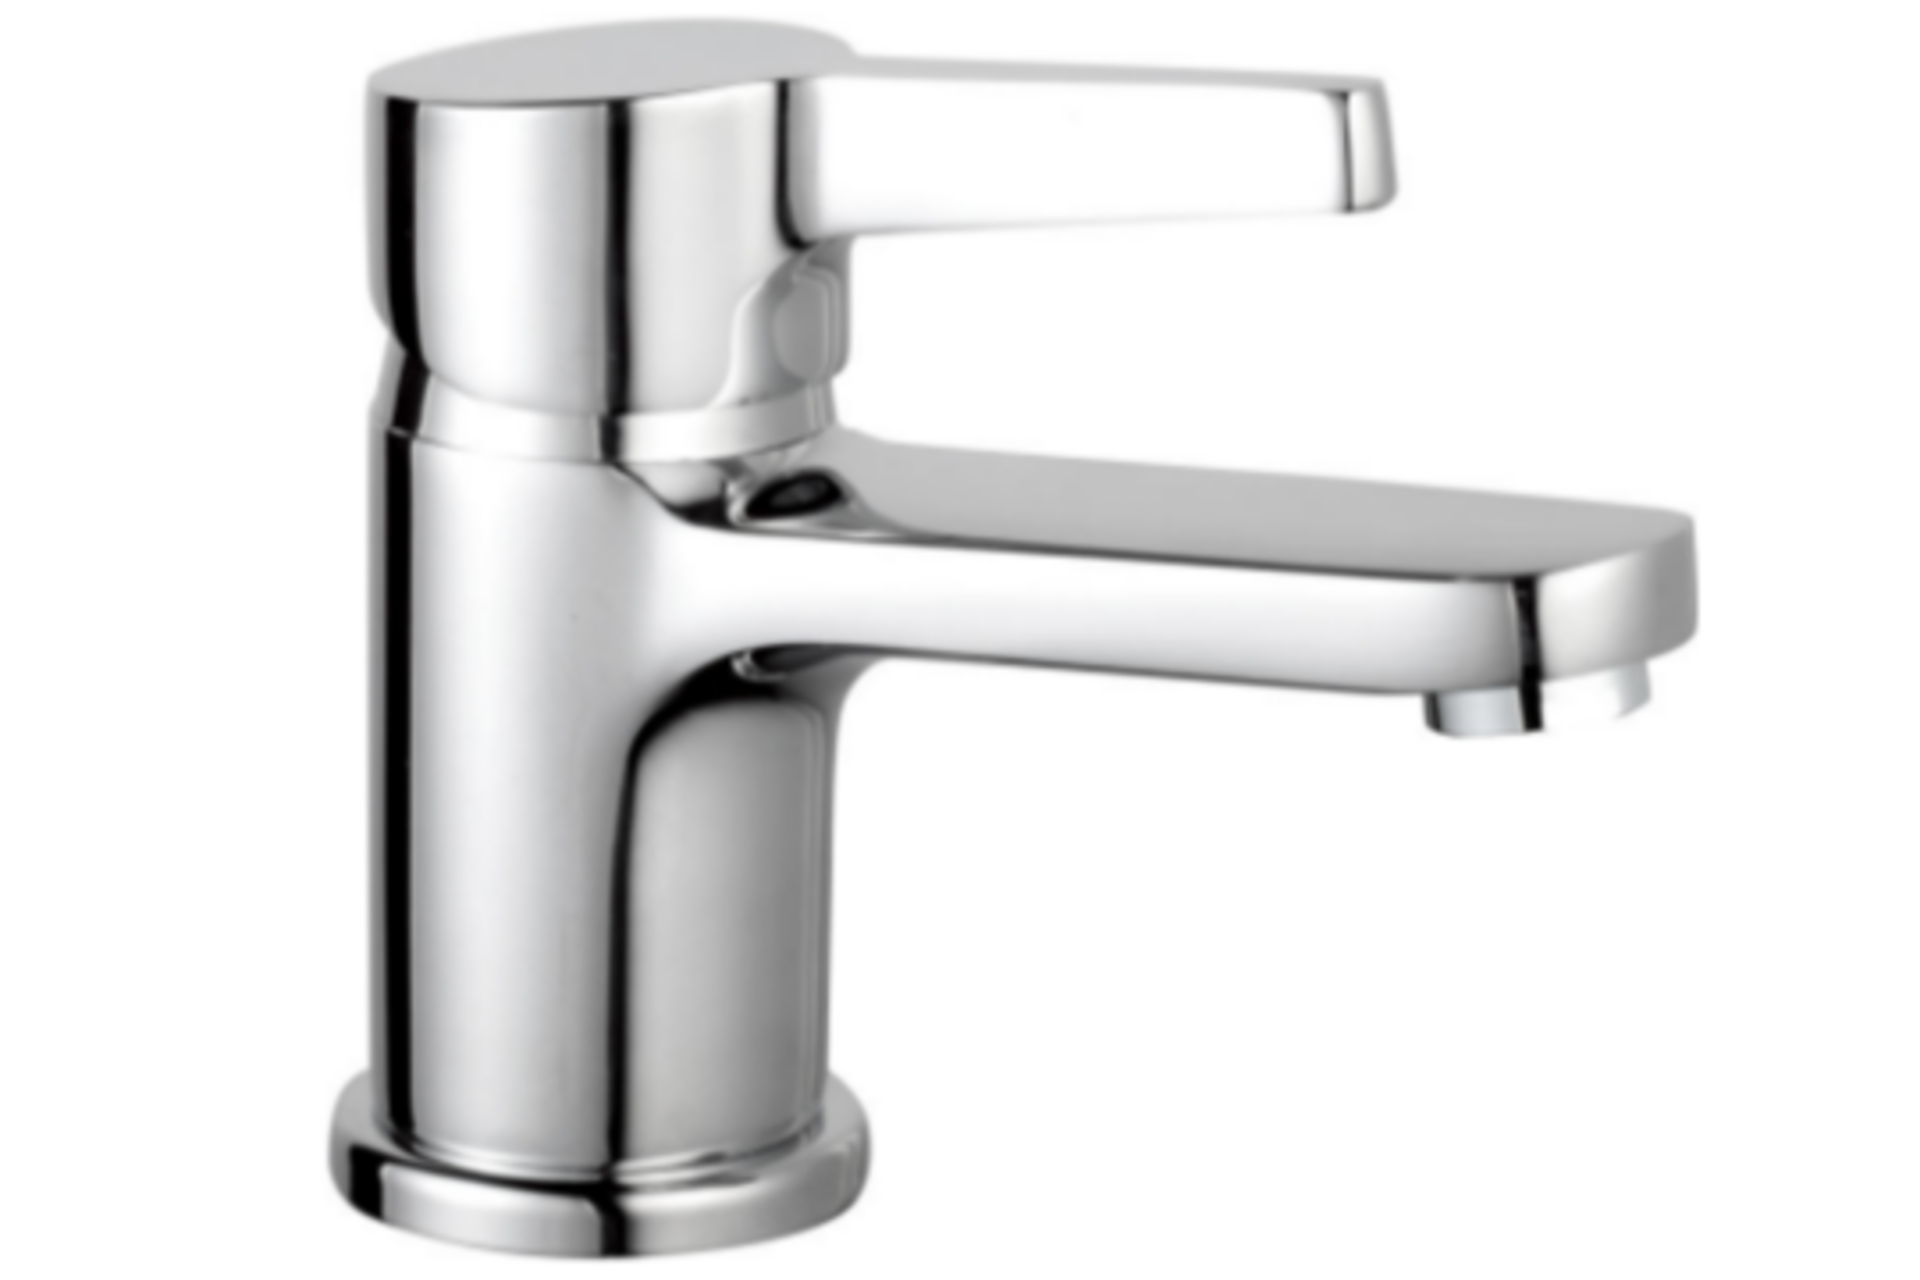 3 x NEW BOXED Abode Lamona CONTEMPORARY CHROME BATHROOM BASIN TAPS. RRP £59.99 EACH, GIVING THIS LOT